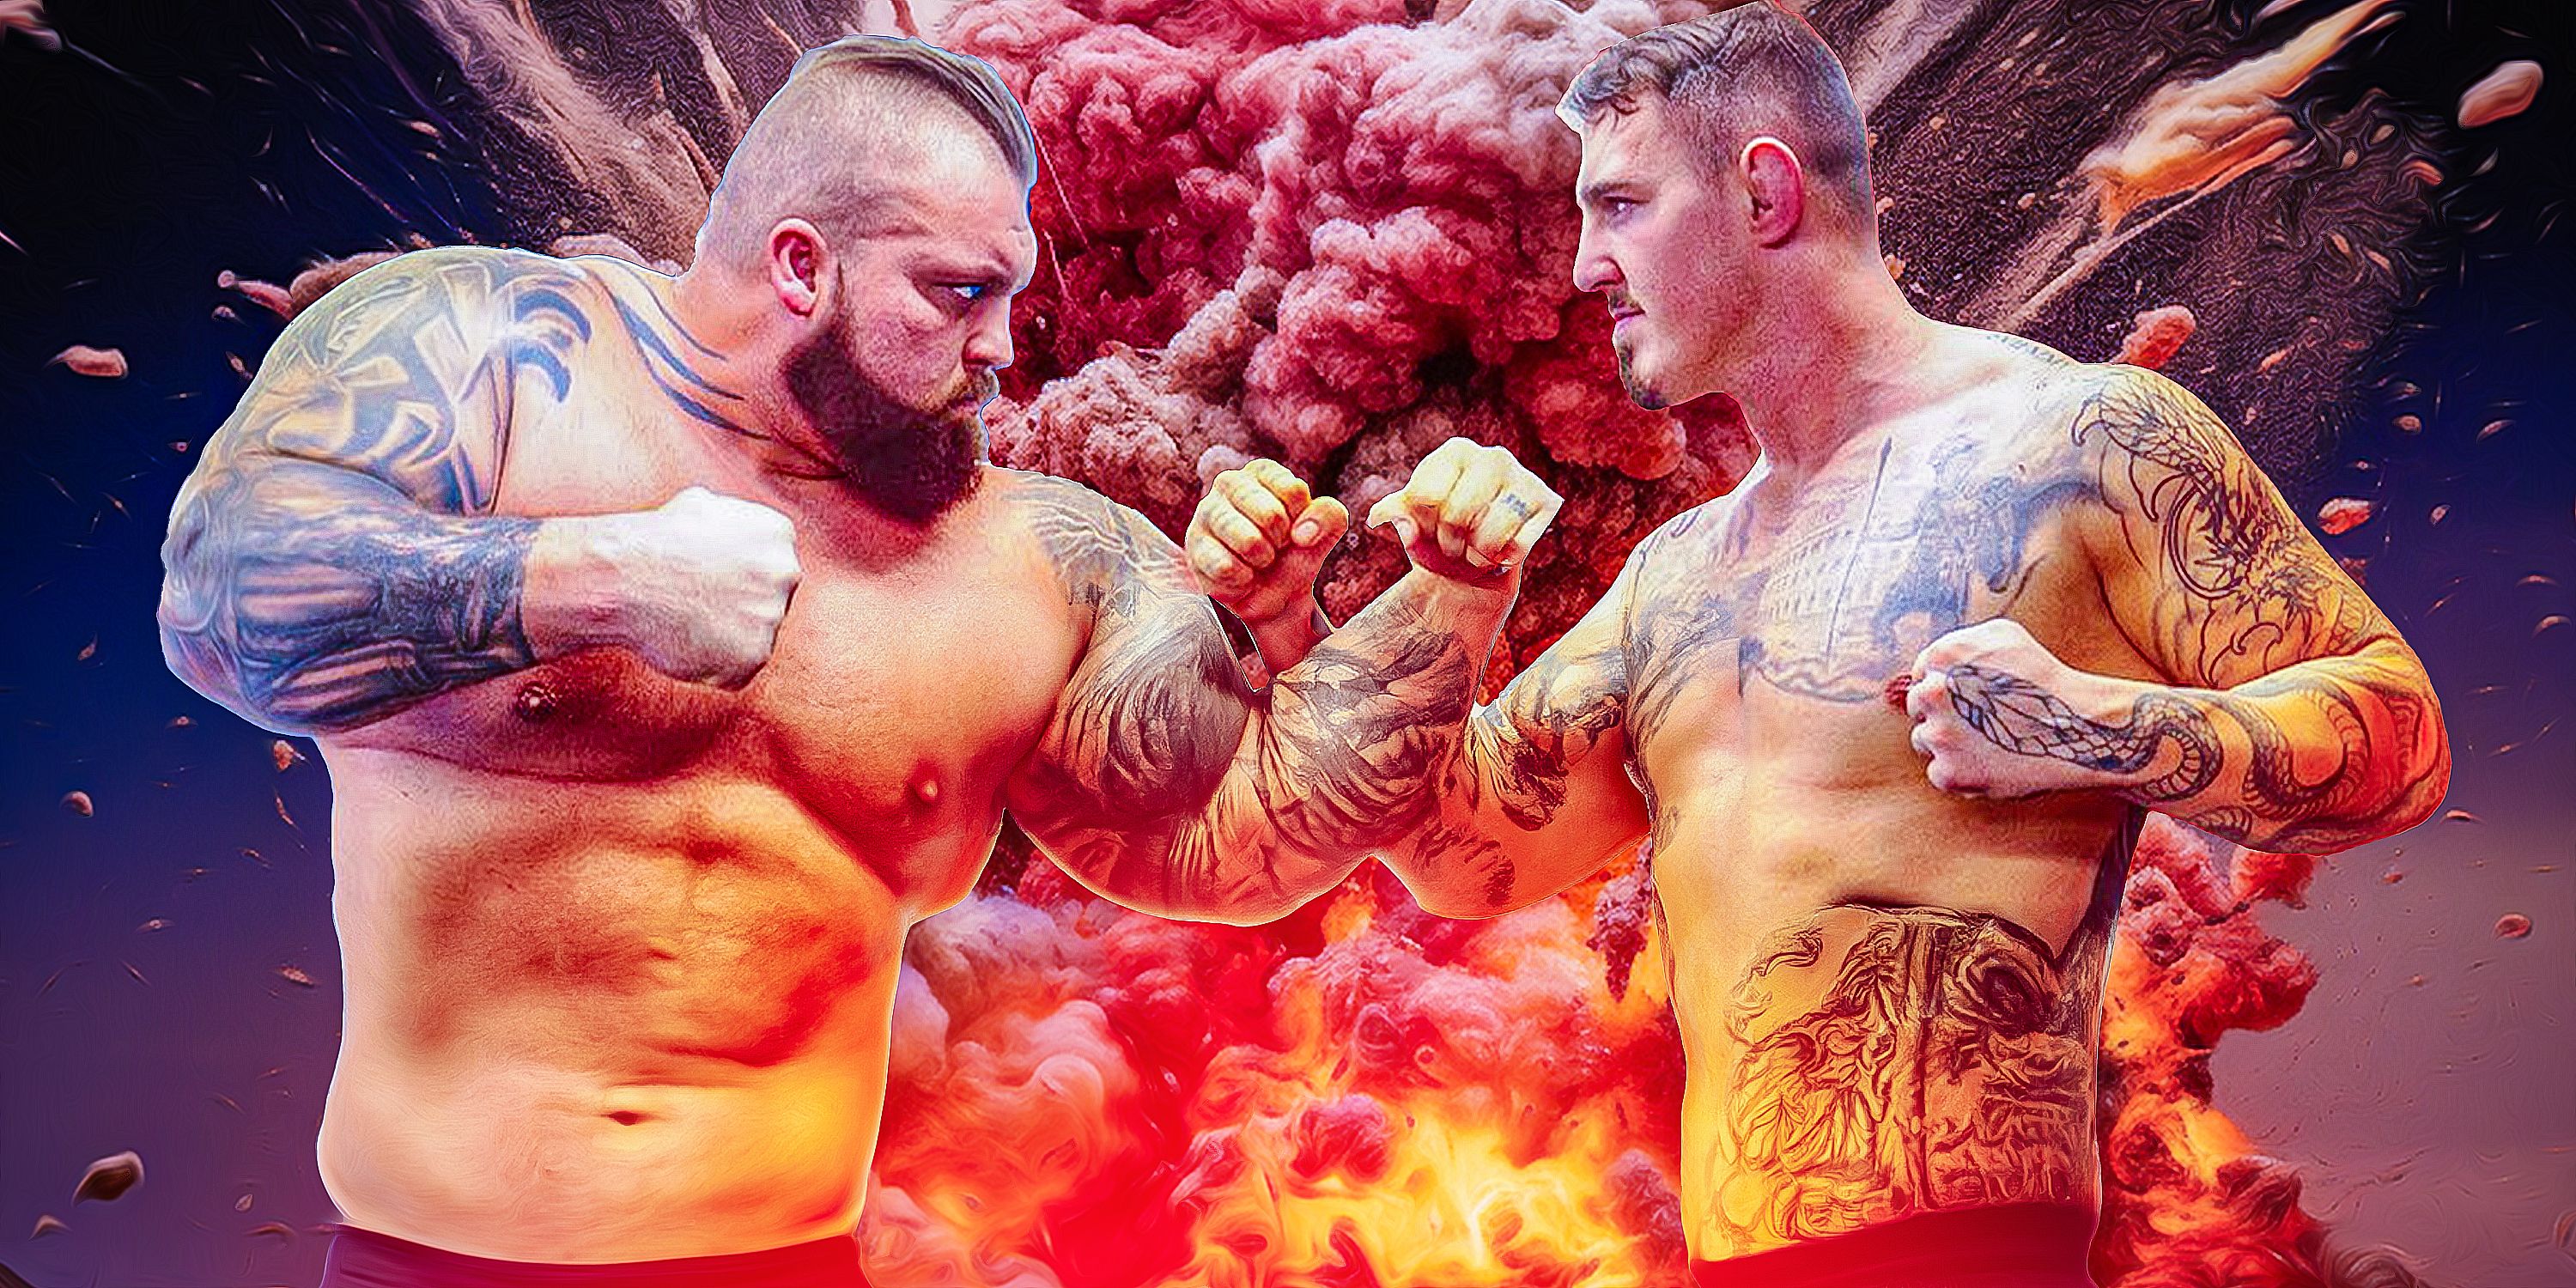 Eddie-Hall-&-Tom-Aspinall-compete-to-see-who-has-the-hardest-punch---image